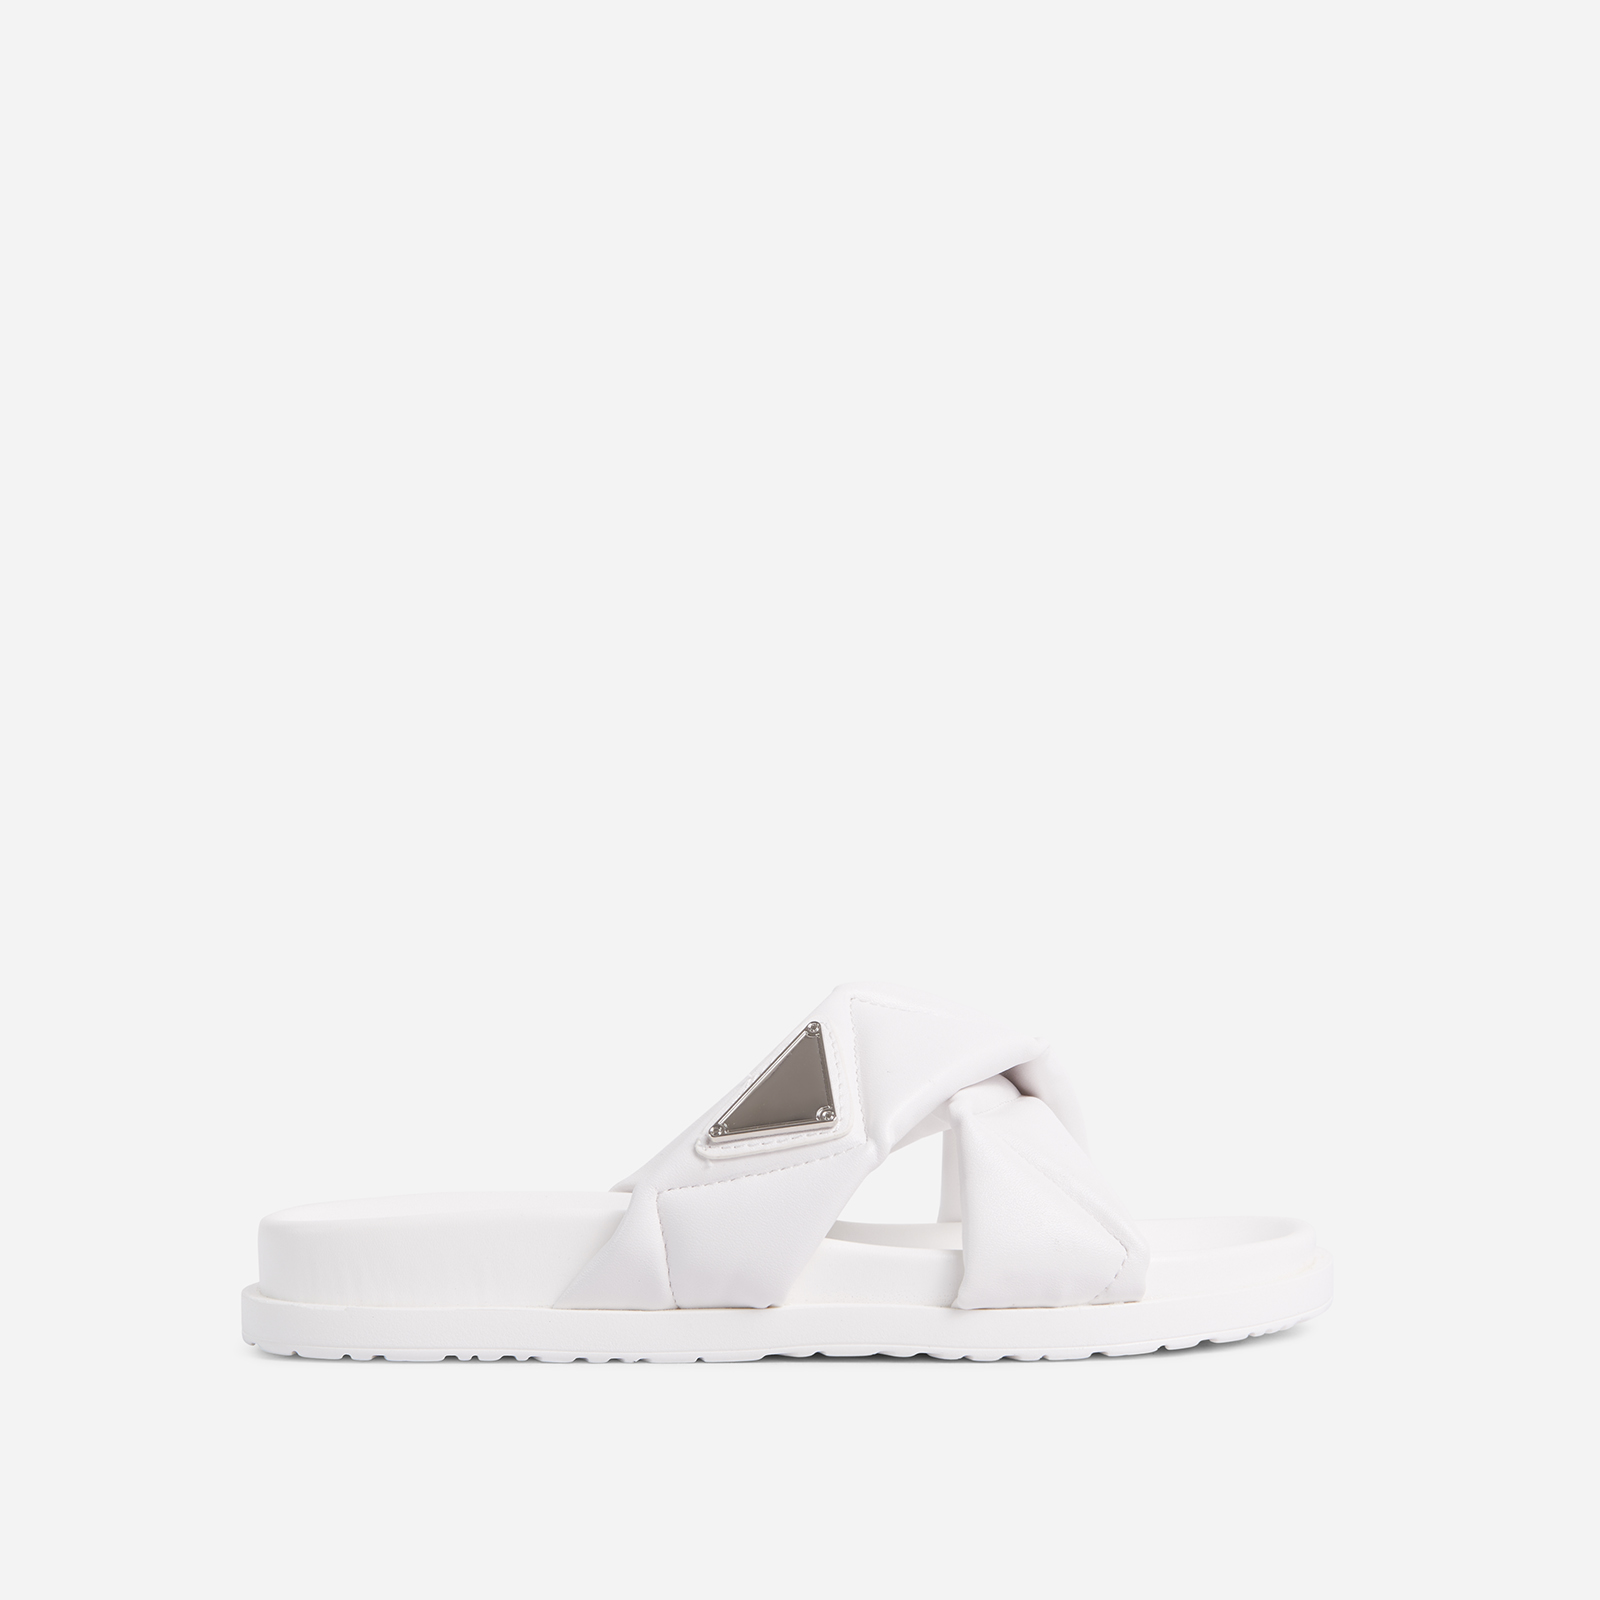 iconic-babe quilted cross strap detail flat slider sandal in white faux leather, white